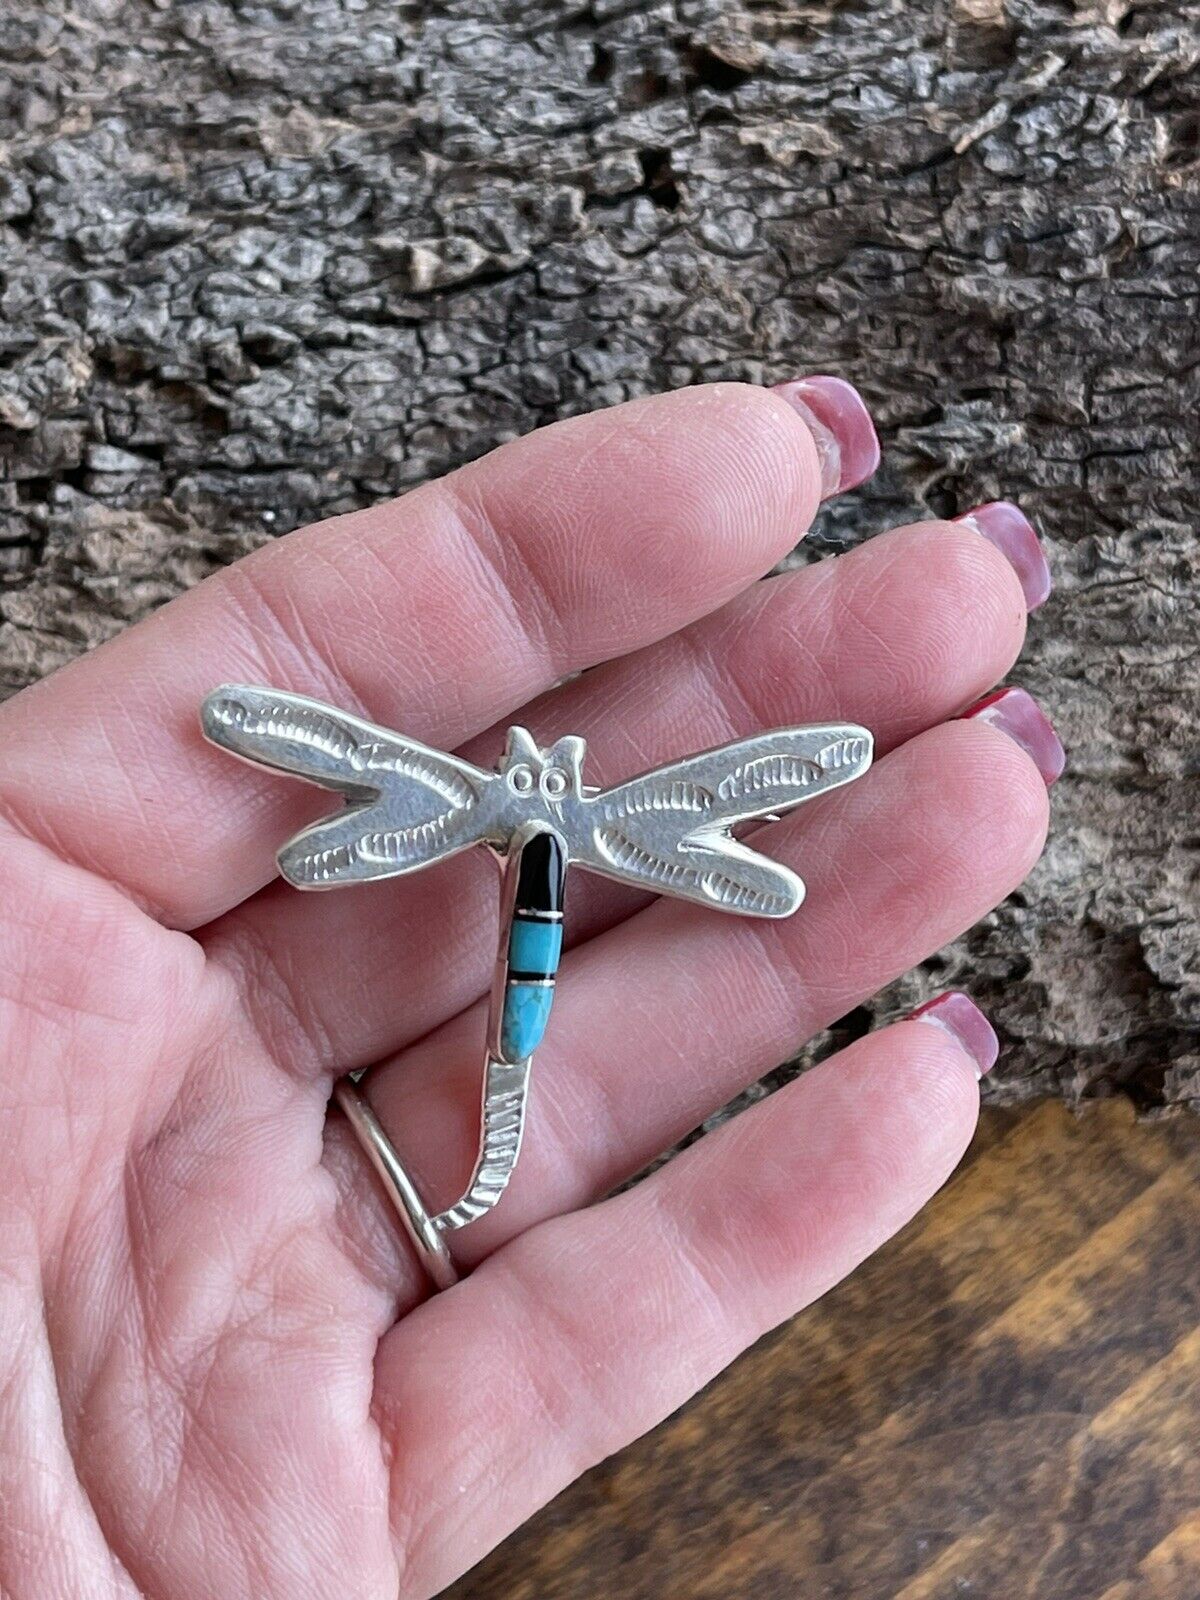 Navajo Sterling Silver Turquoise and Onyx Stone Dragonfly Pendant Pin Signed